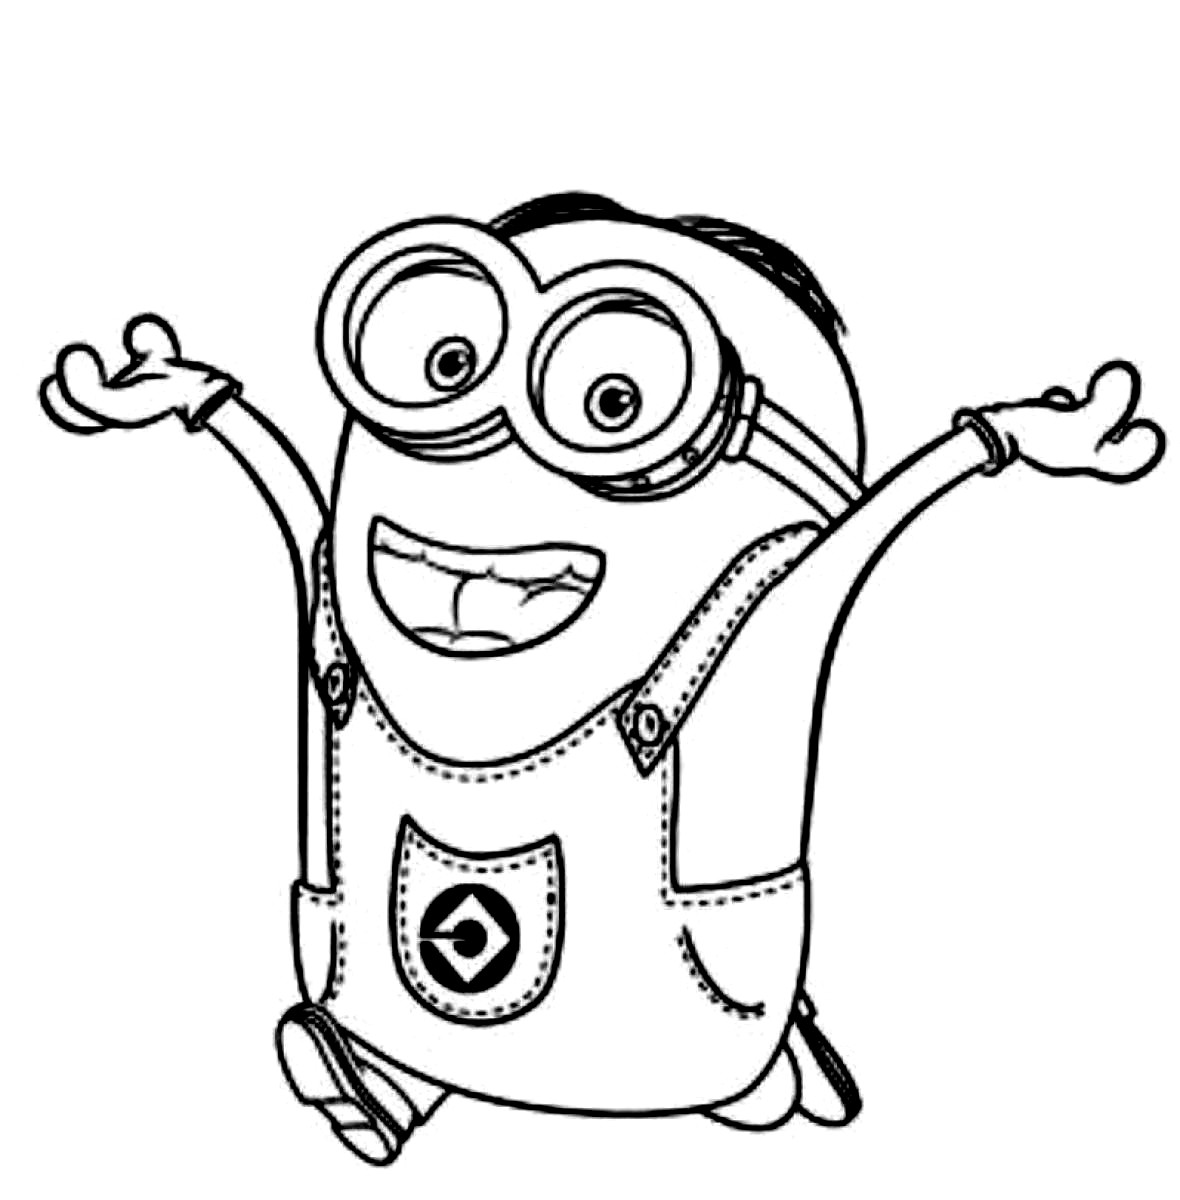 Despicable Me Coloring Pages
 Free Printable Despicable Me Coloring Pages For Kids